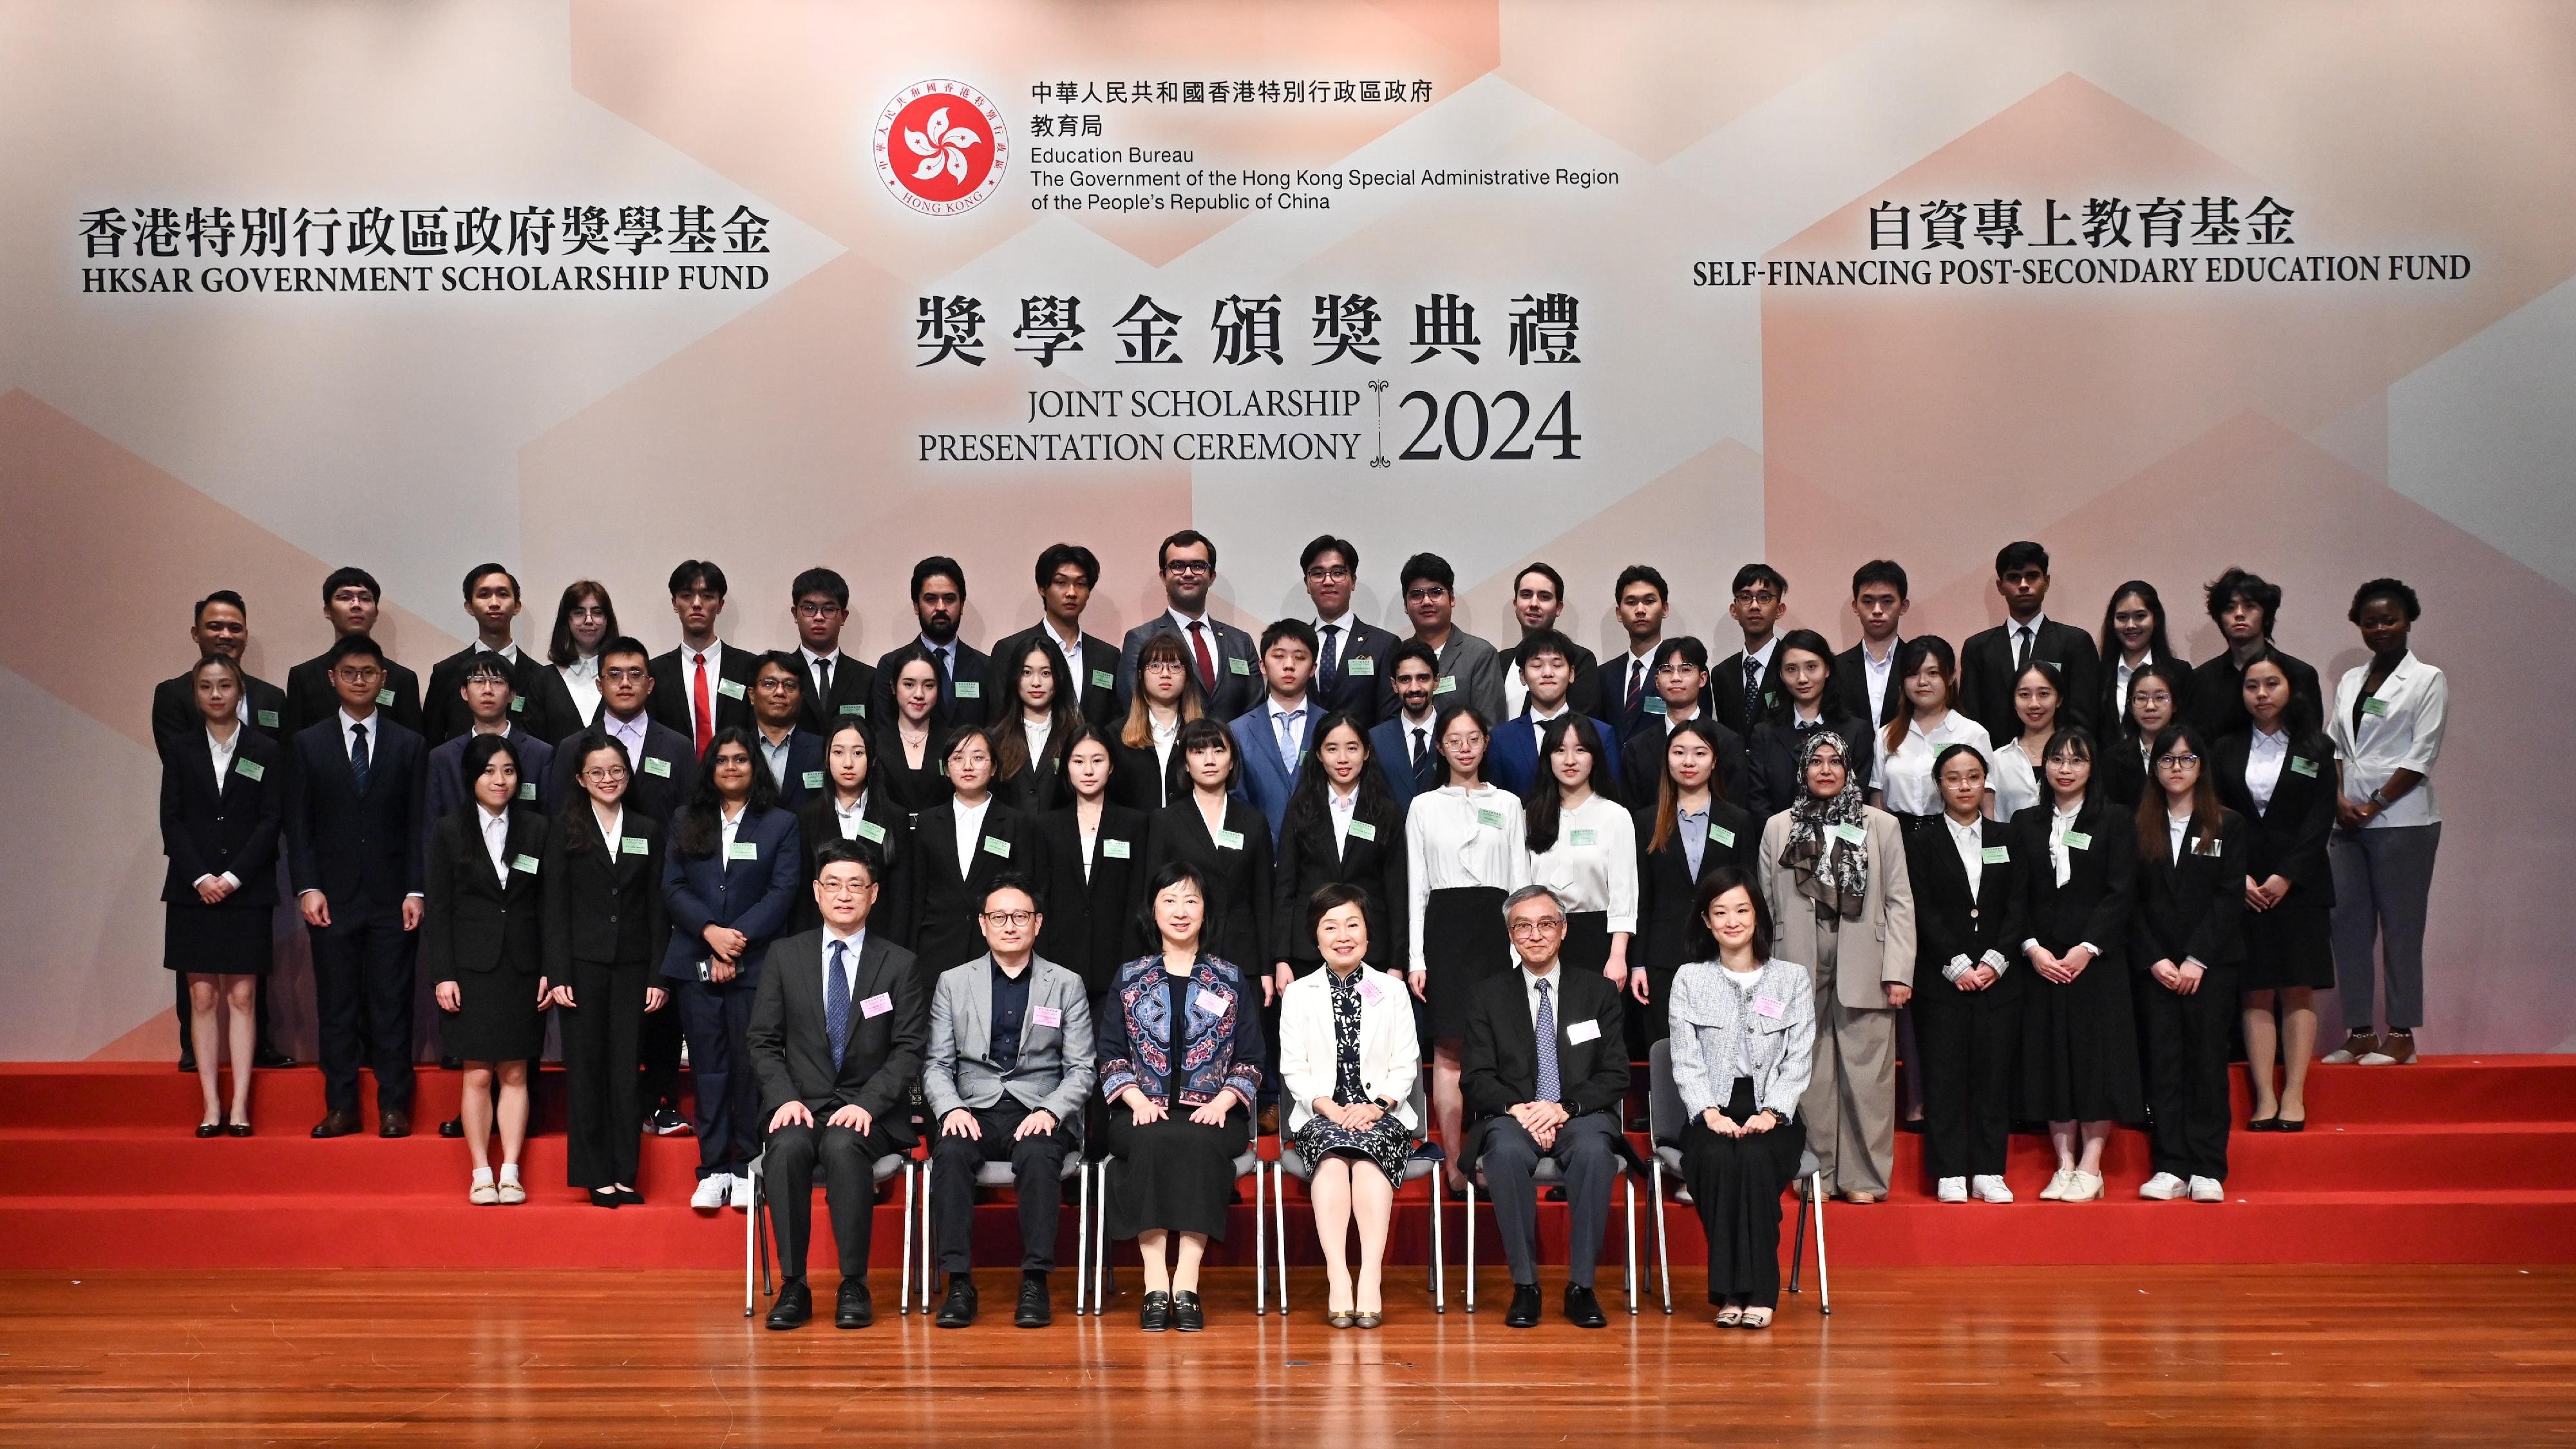 The Education Bureau held the HKSAR Government Scholarship Fund and Self-financing Post-secondary Education Fund Joint Scholarship Presentation Ceremony today (April 25). The Secretary for Education, Dr Choi Yuk-lin (front row, third right); the Permanent Secretary for Education, Ms Michelle Li (front row, third left), and other guests are pictured with students who are awarded scholarships under the HKSAR Government Scholarship Fund.